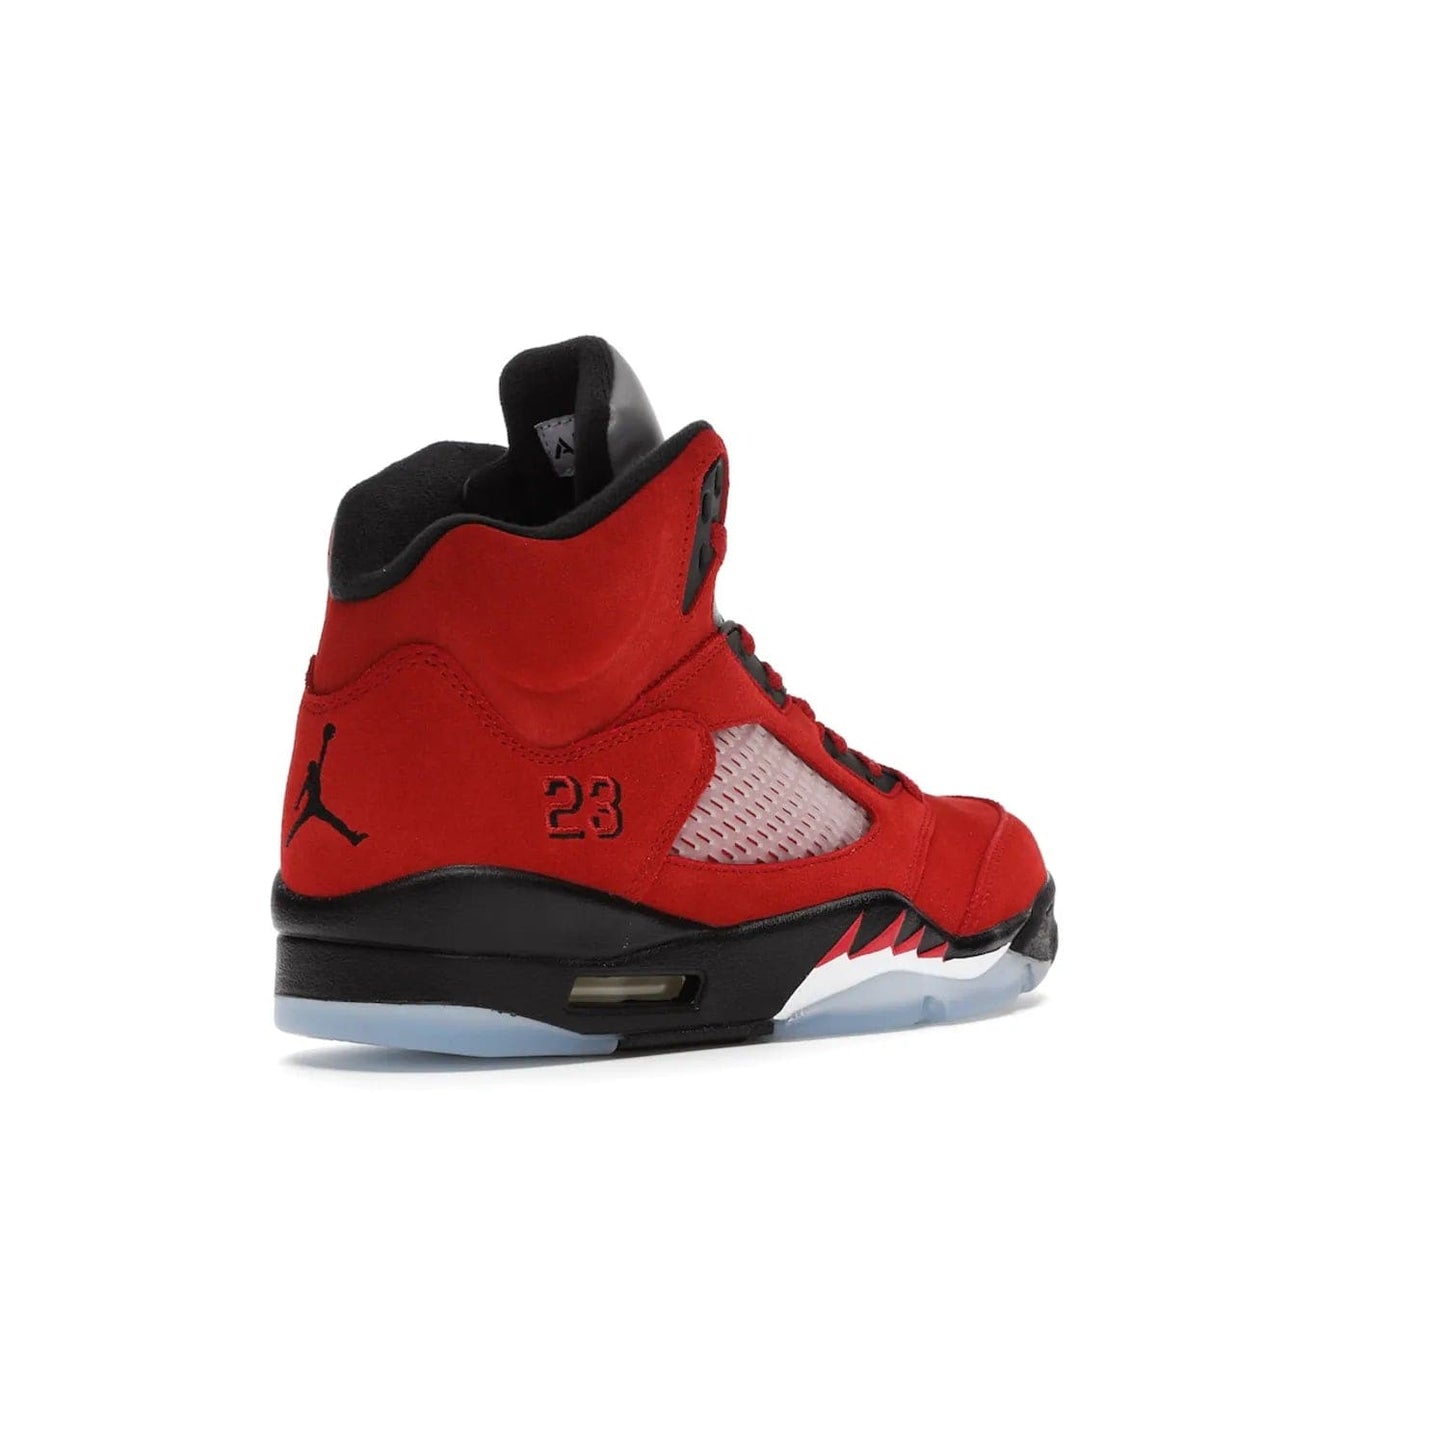 Jordan 5 Retro Raging Bull Red (2021) - Image 32 - Only at www.BallersClubKickz.com - Get ready for the 2021 stand-alone release of the Air Jordan 5 Raging Bulls! This all-suede upper combines luxe details like a Jumpman logo, red & black "23" embroidery and shark tooth detailing, atop a black midsole. Don't miss out - release date in April 2021 for $190.